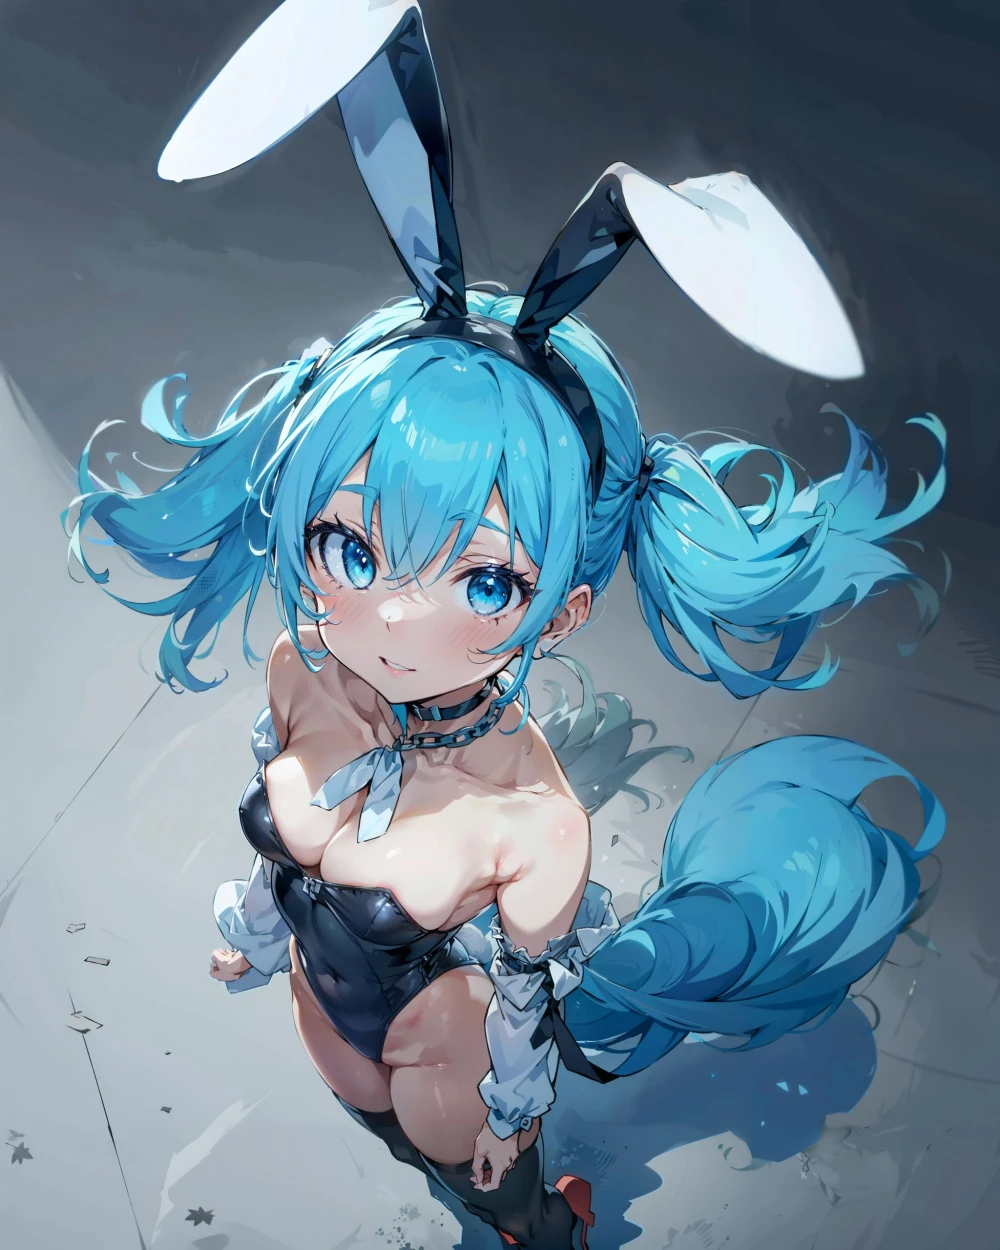 hatsune-miku-anime-style-all-ages-2-19